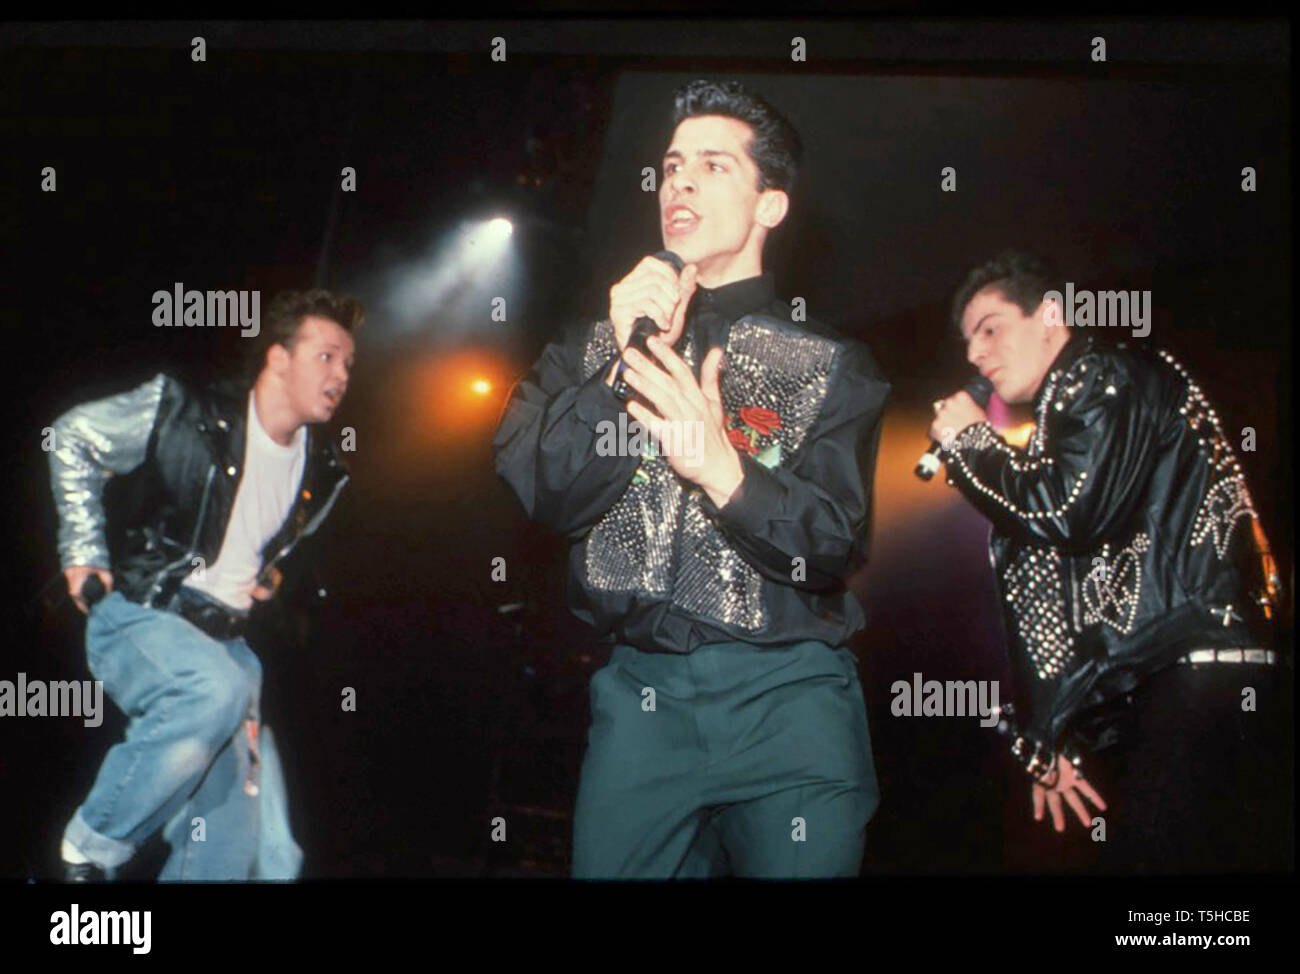 NEW KIDS ON THE BLOCK American boy band about 1990 Stock Photo